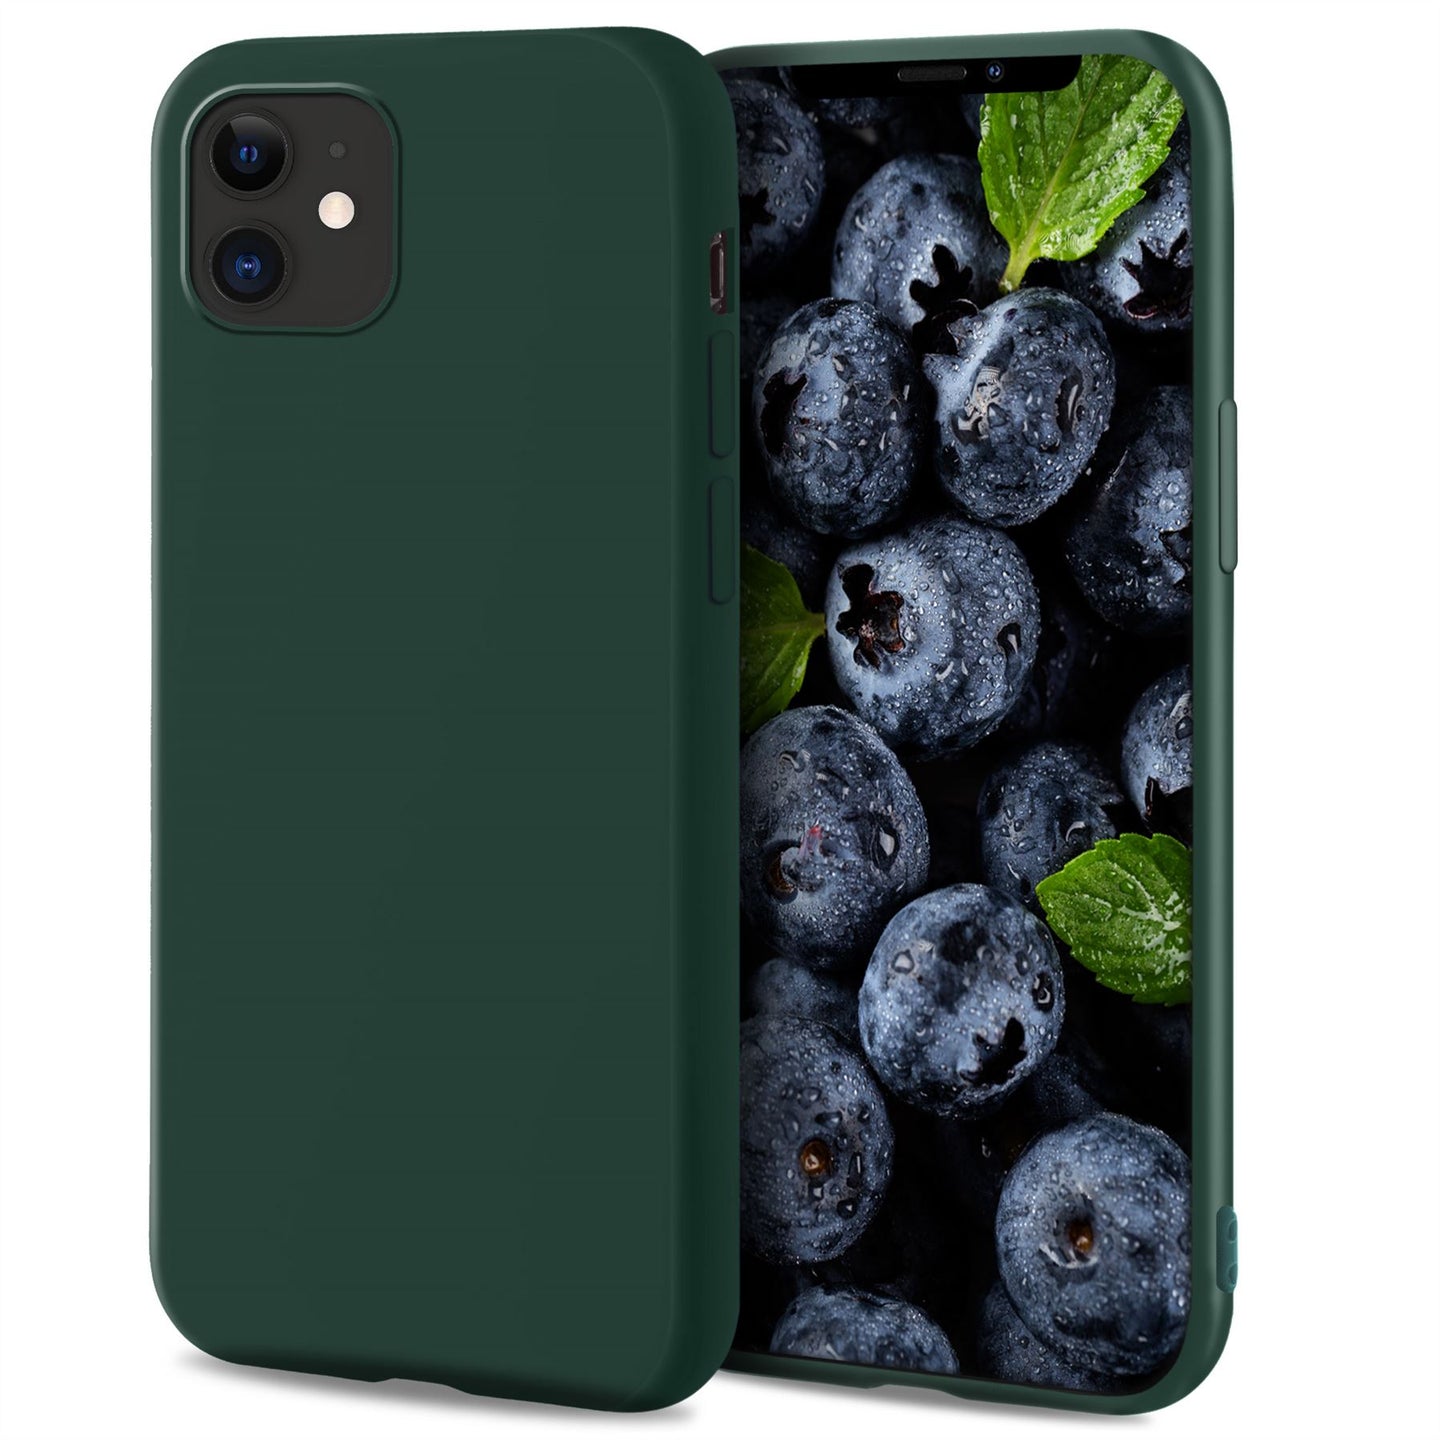 Moozy Lifestyle. Designed for iPhone 12, iPhone 12 Pro Case, Dark Green - Liquid Silicone Cover with Matte Finish and Soft Microfiber Lining